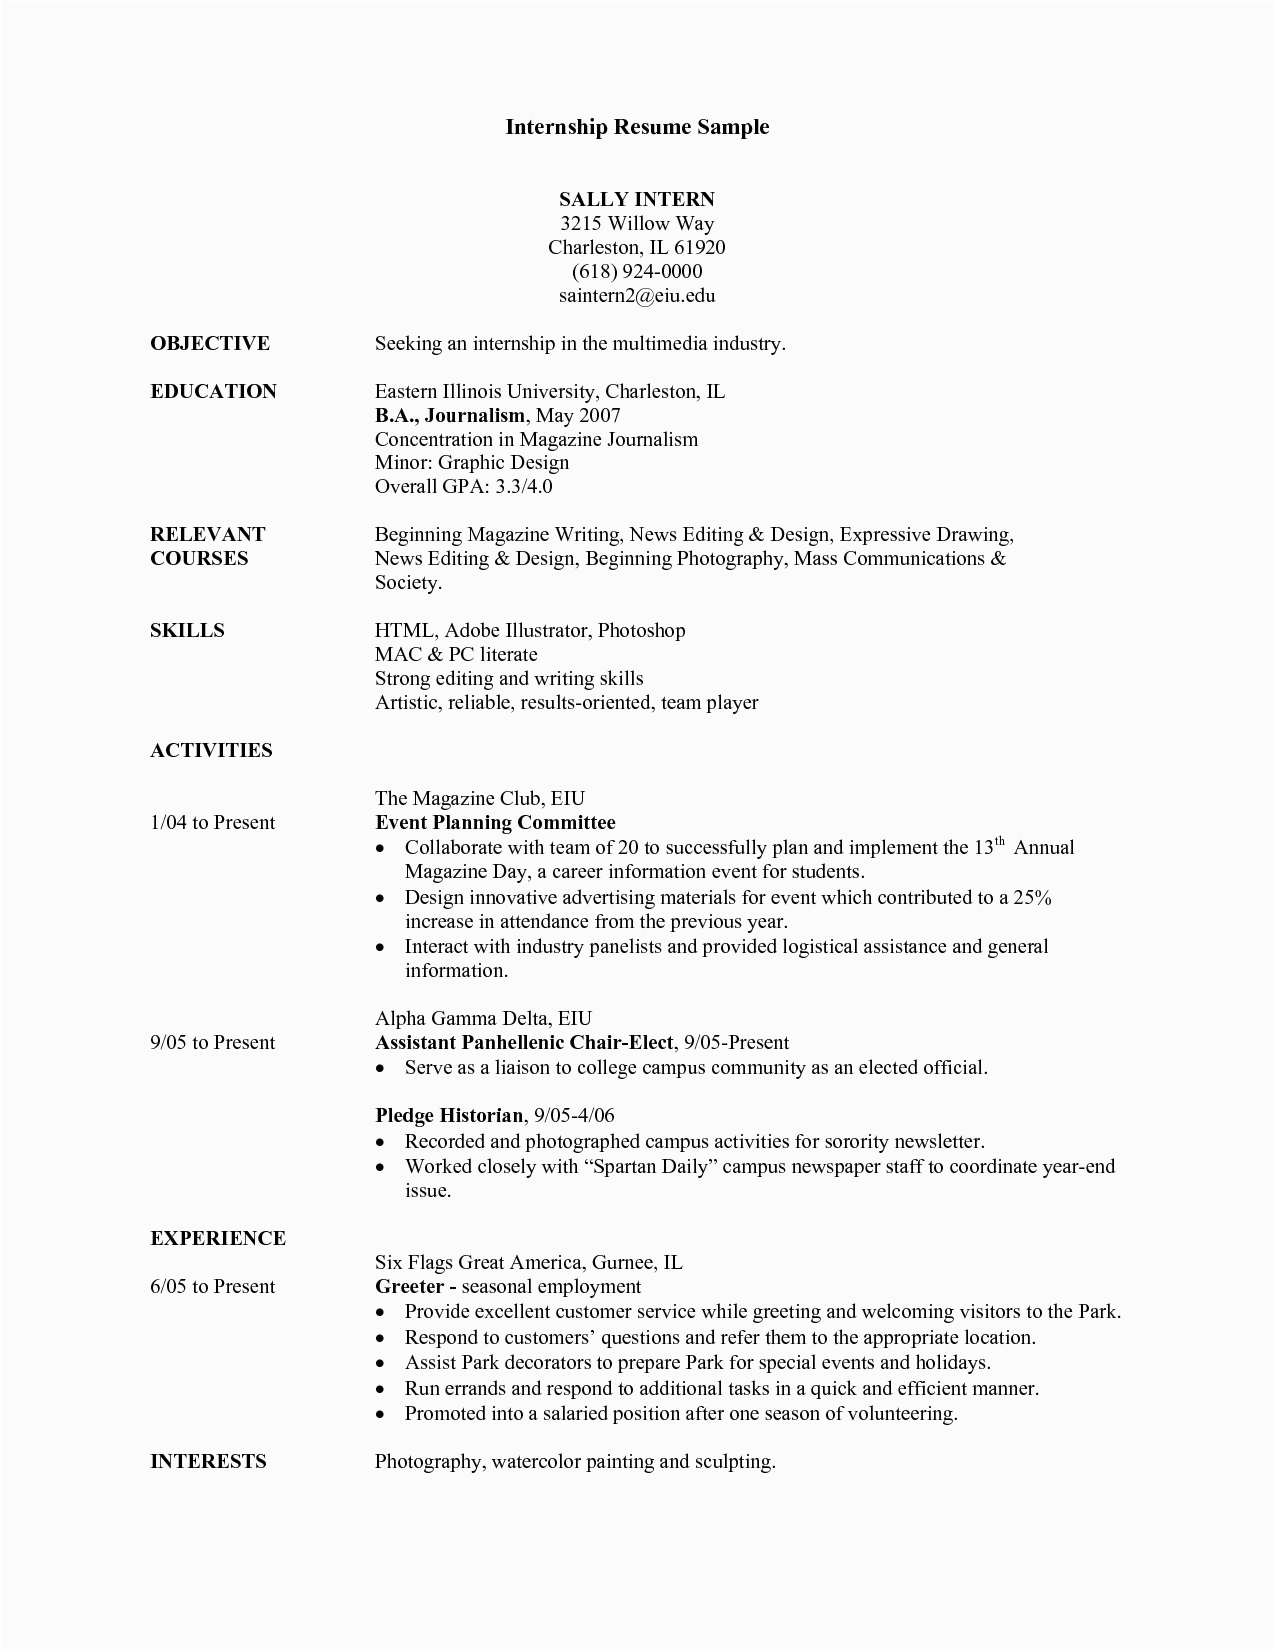 College Student Resume for Internship Template Student Resume for Internship Database Letter Templates